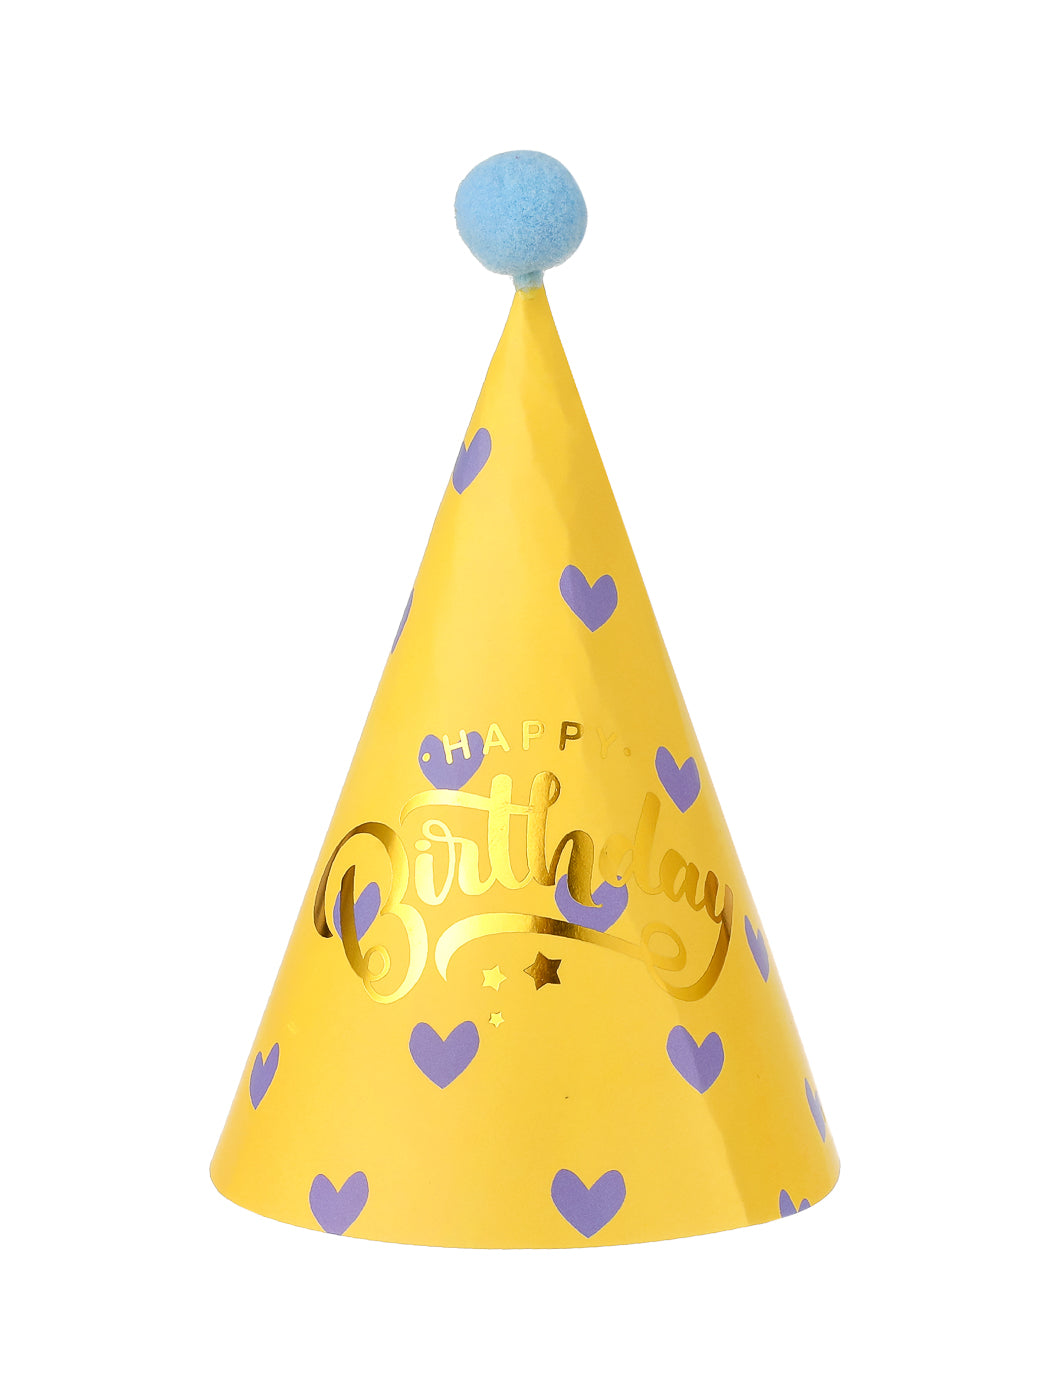 MINISO BIRTHDAY PARTY HAT(YELLOW, HEART) 2010879915105 PARTY DECORATIONS